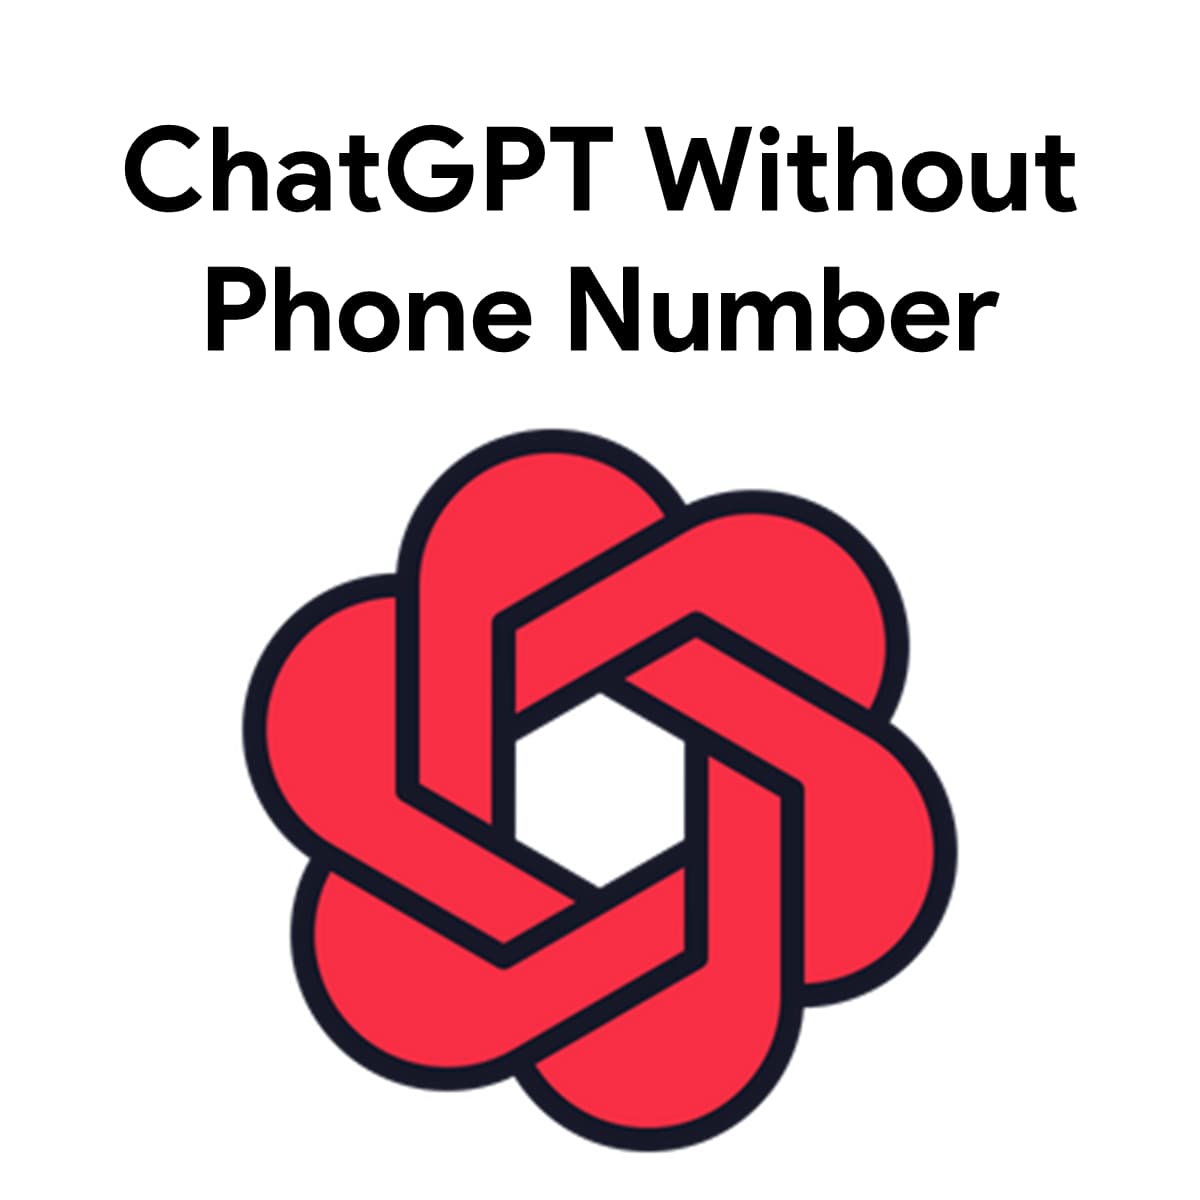 How to use chatgpt without phone number